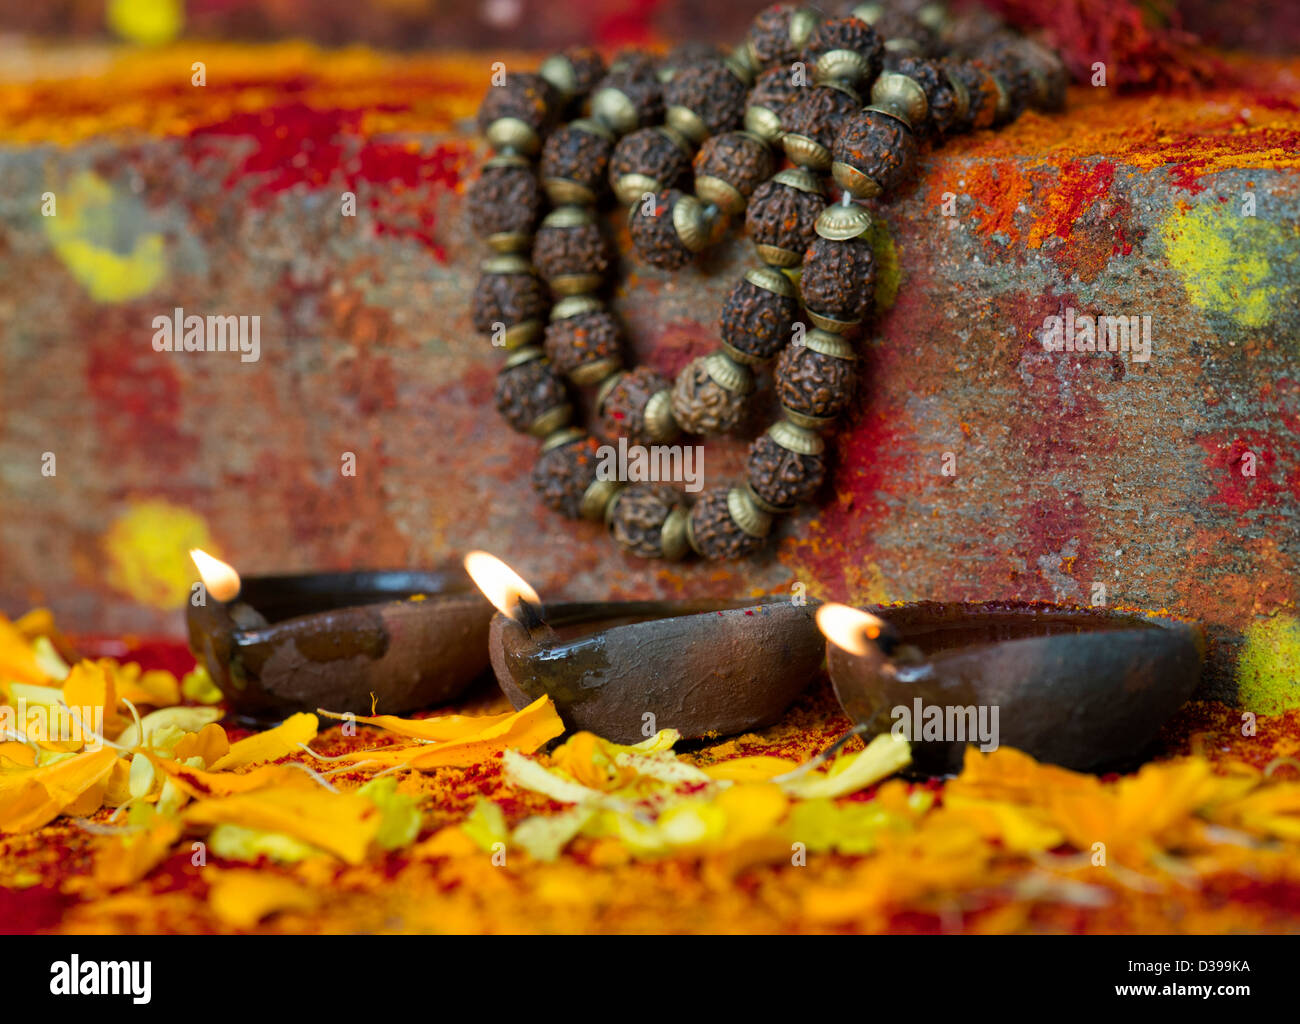 Oil Lamps and Indian Rudraksha / Japa Mala prayer beads on the steps of a rural indian village shrine / temple. India Stock Photo